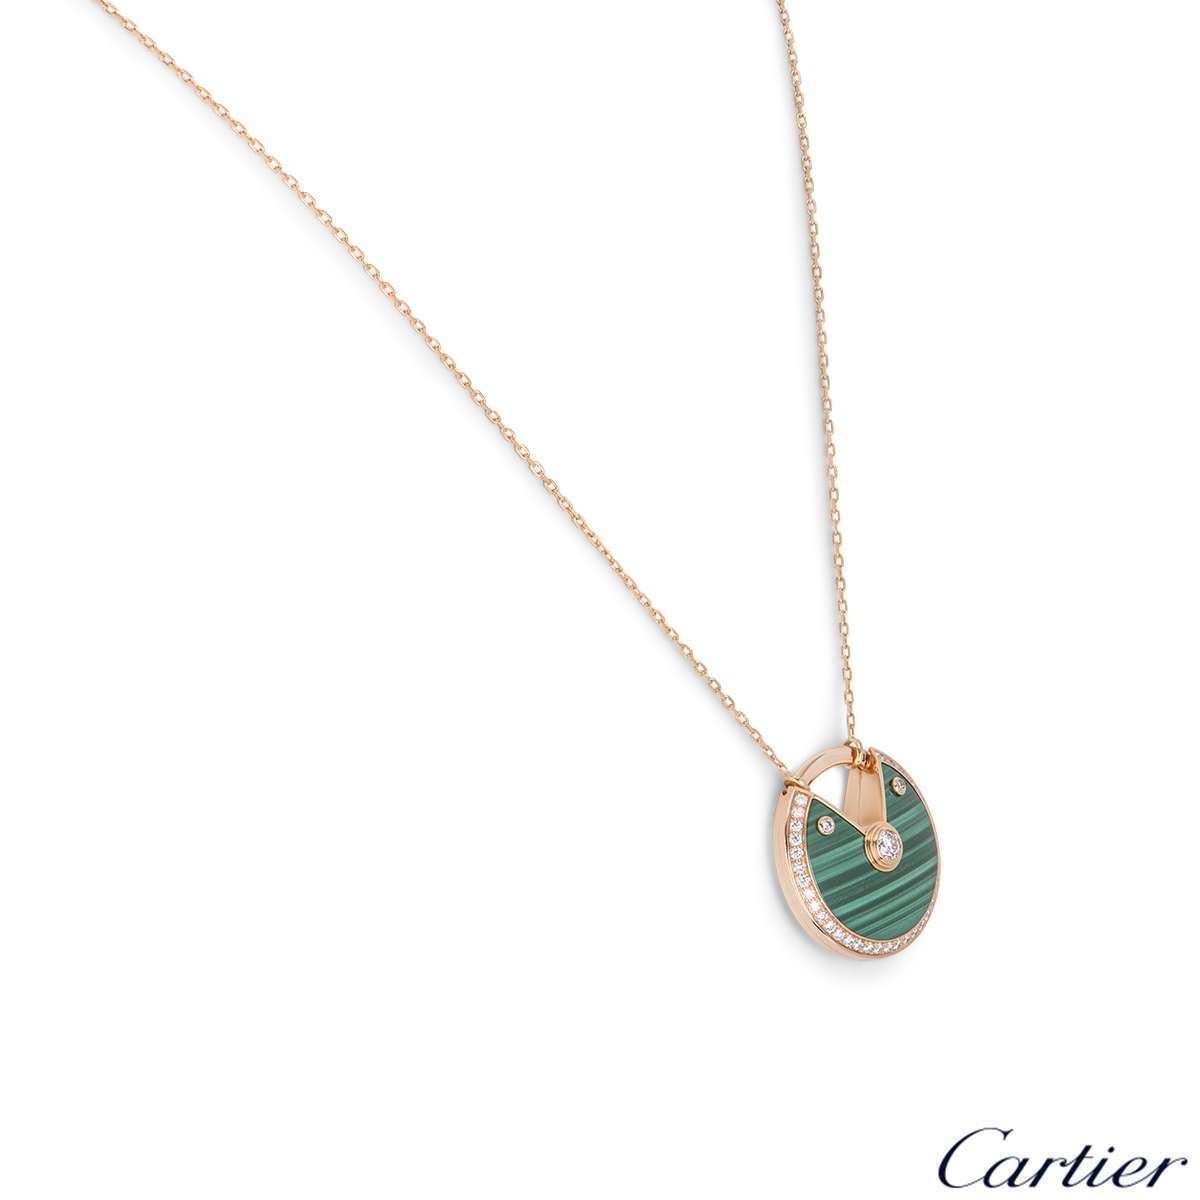 A beautiful 18k rose gold large size necklace from the Amulette de Cartier collection. The necklace comprises of a circular talisman set with malachite, complemented by round brilliant cut diamonds totalling approximately 0.61ct. The talisman is on